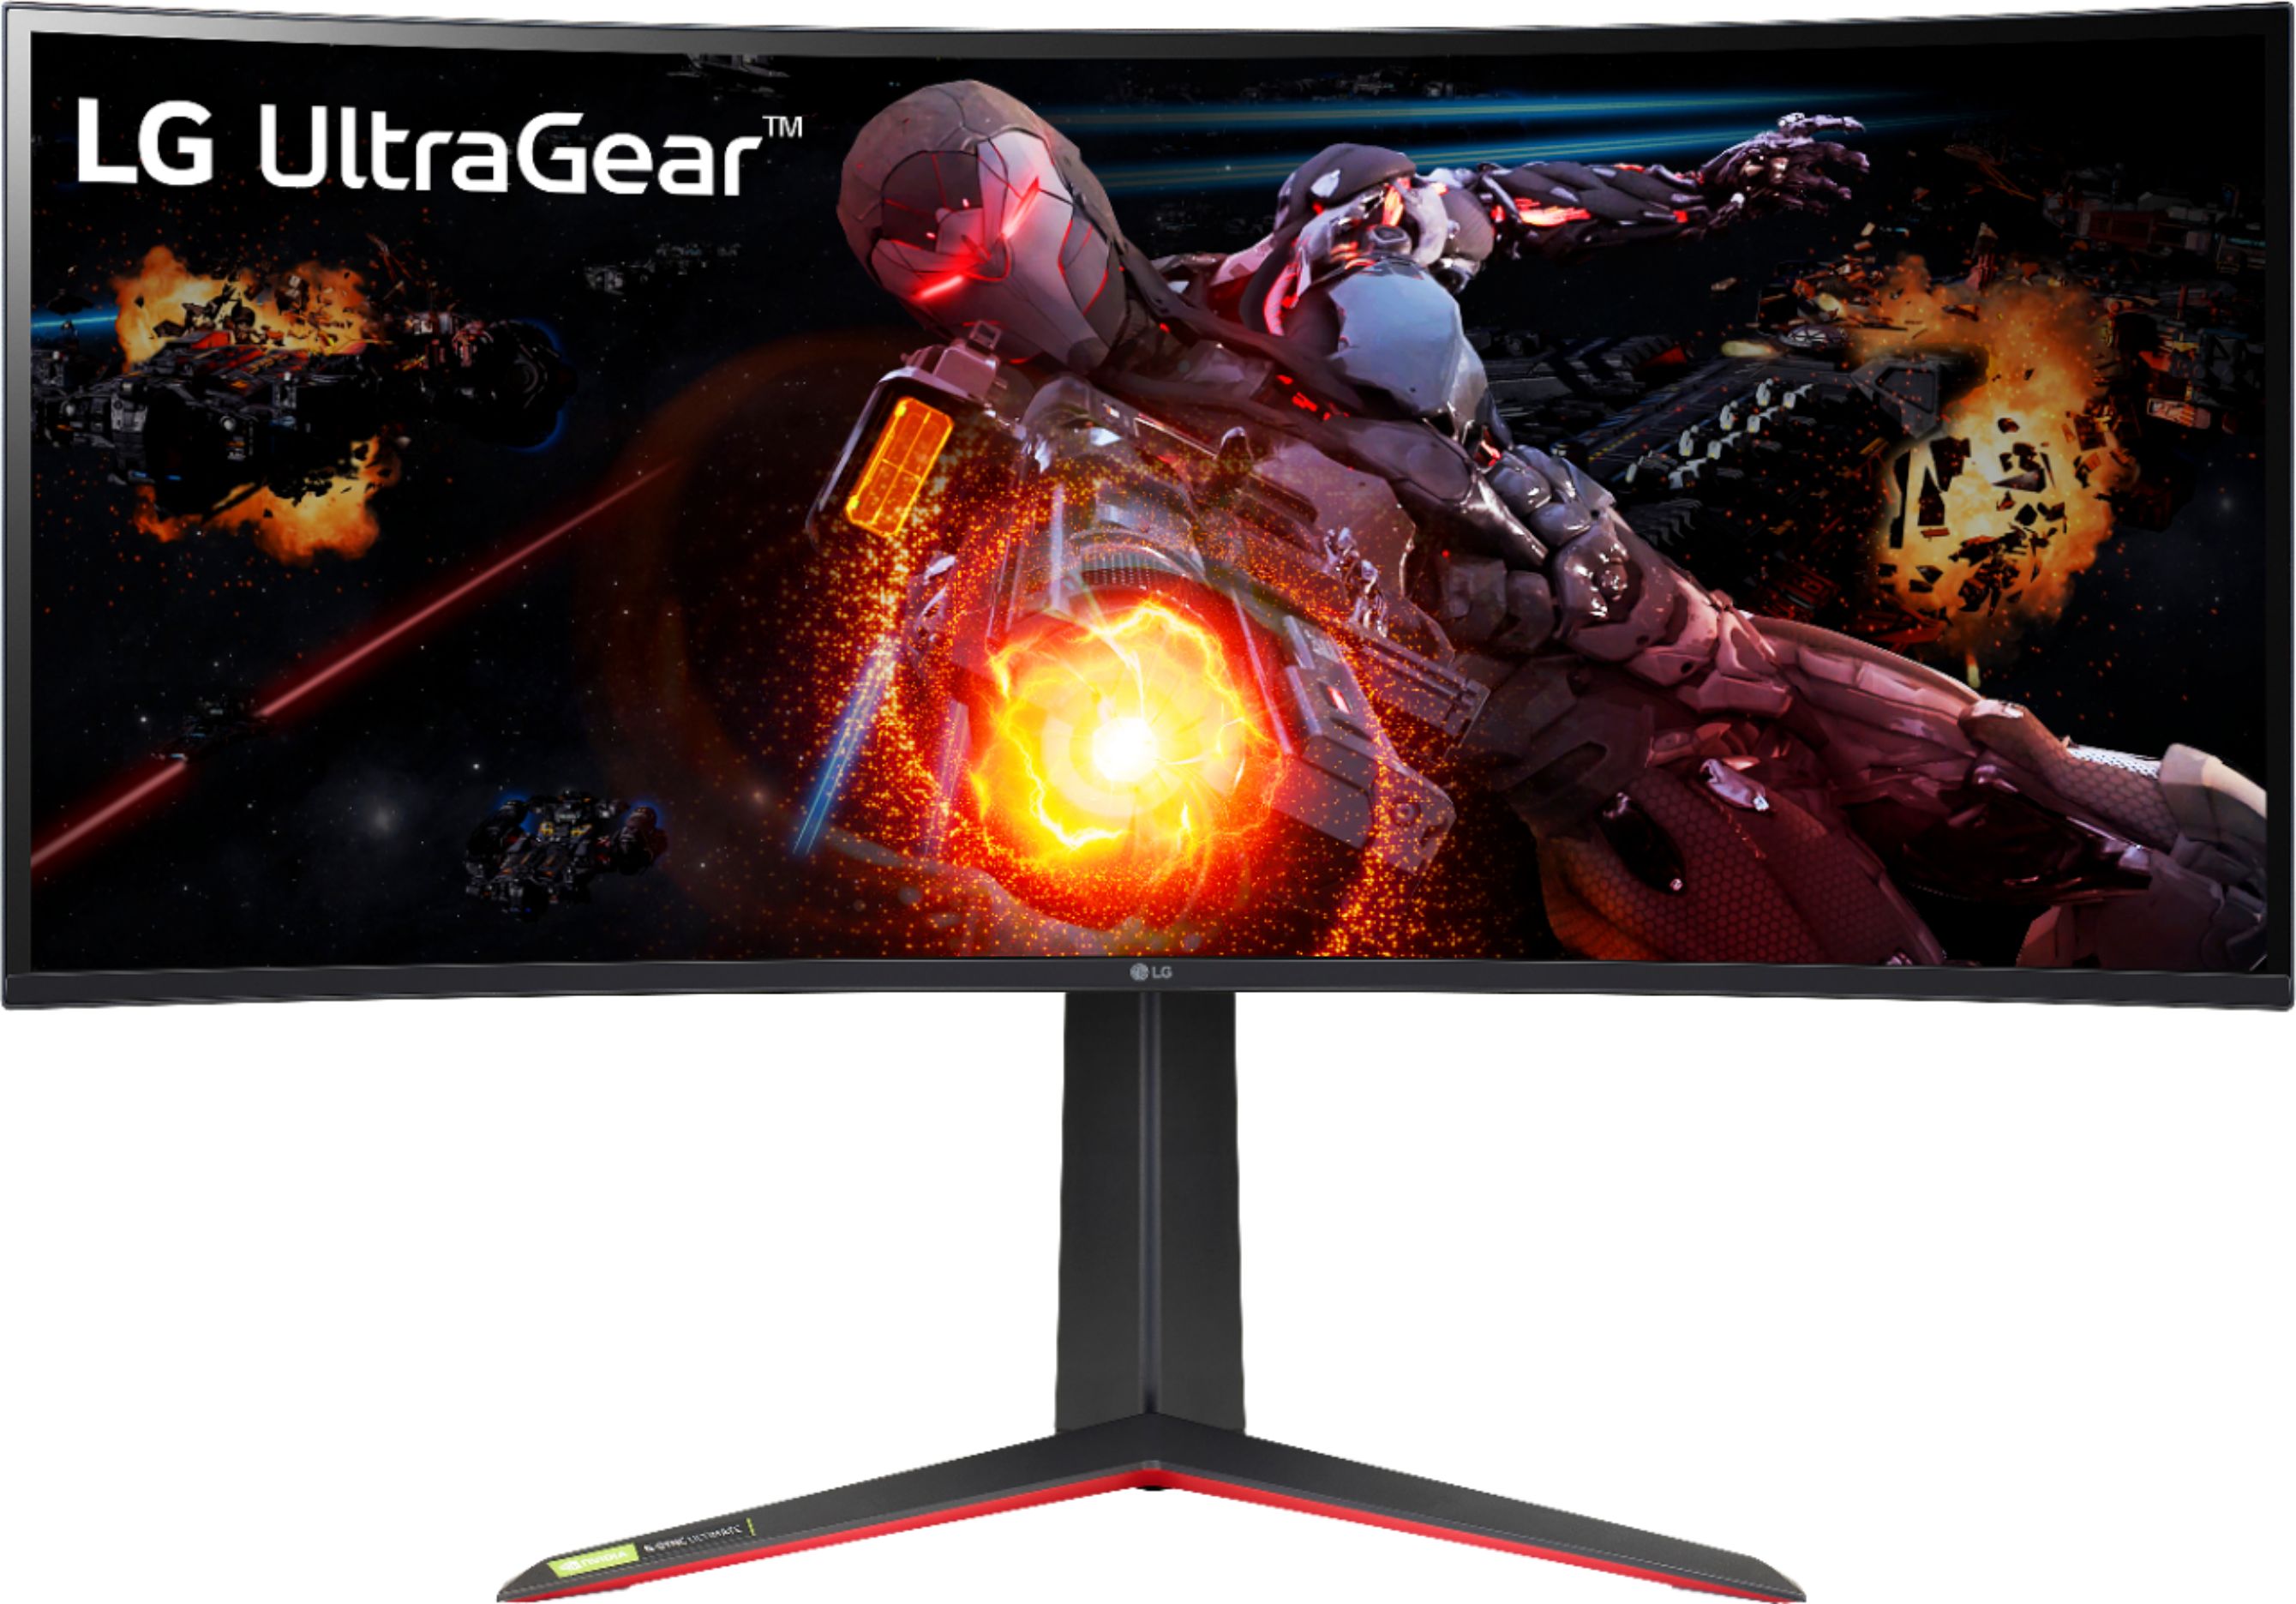 LG 27'' UltraGear® FHD IPS 1ms 240Hz HDR Monitor with G-SYNC